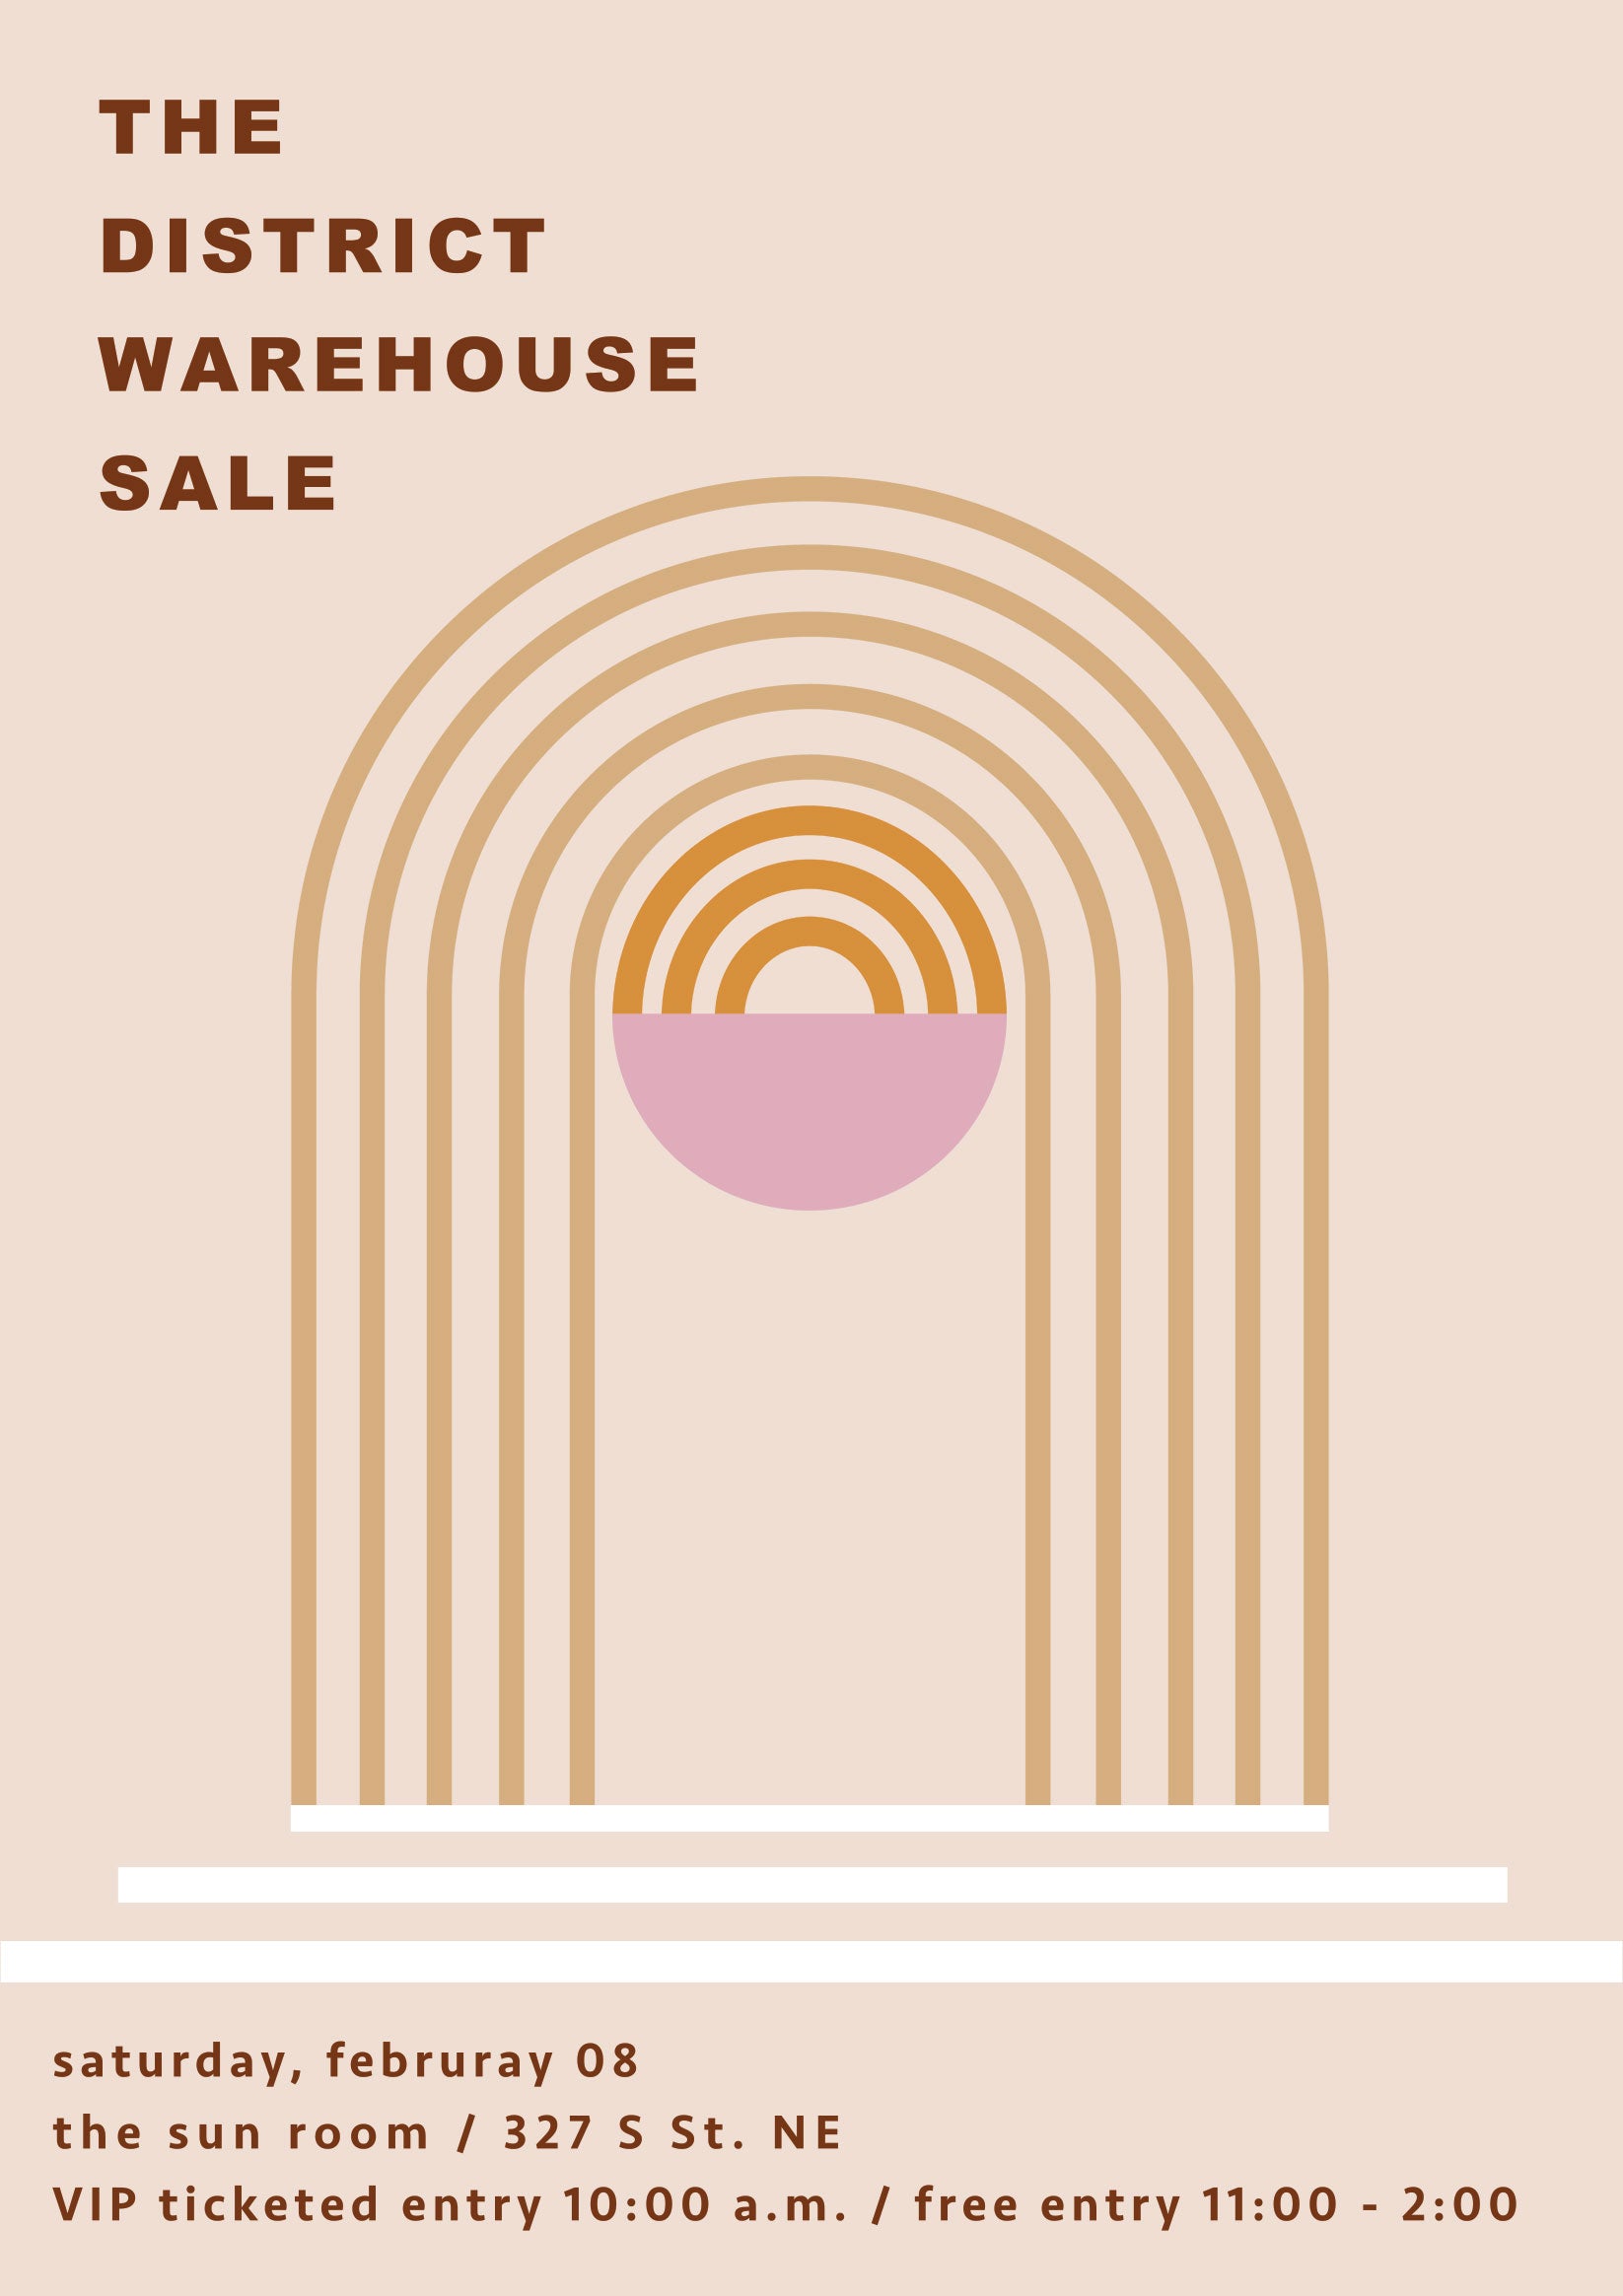 The District Warehouse Sale